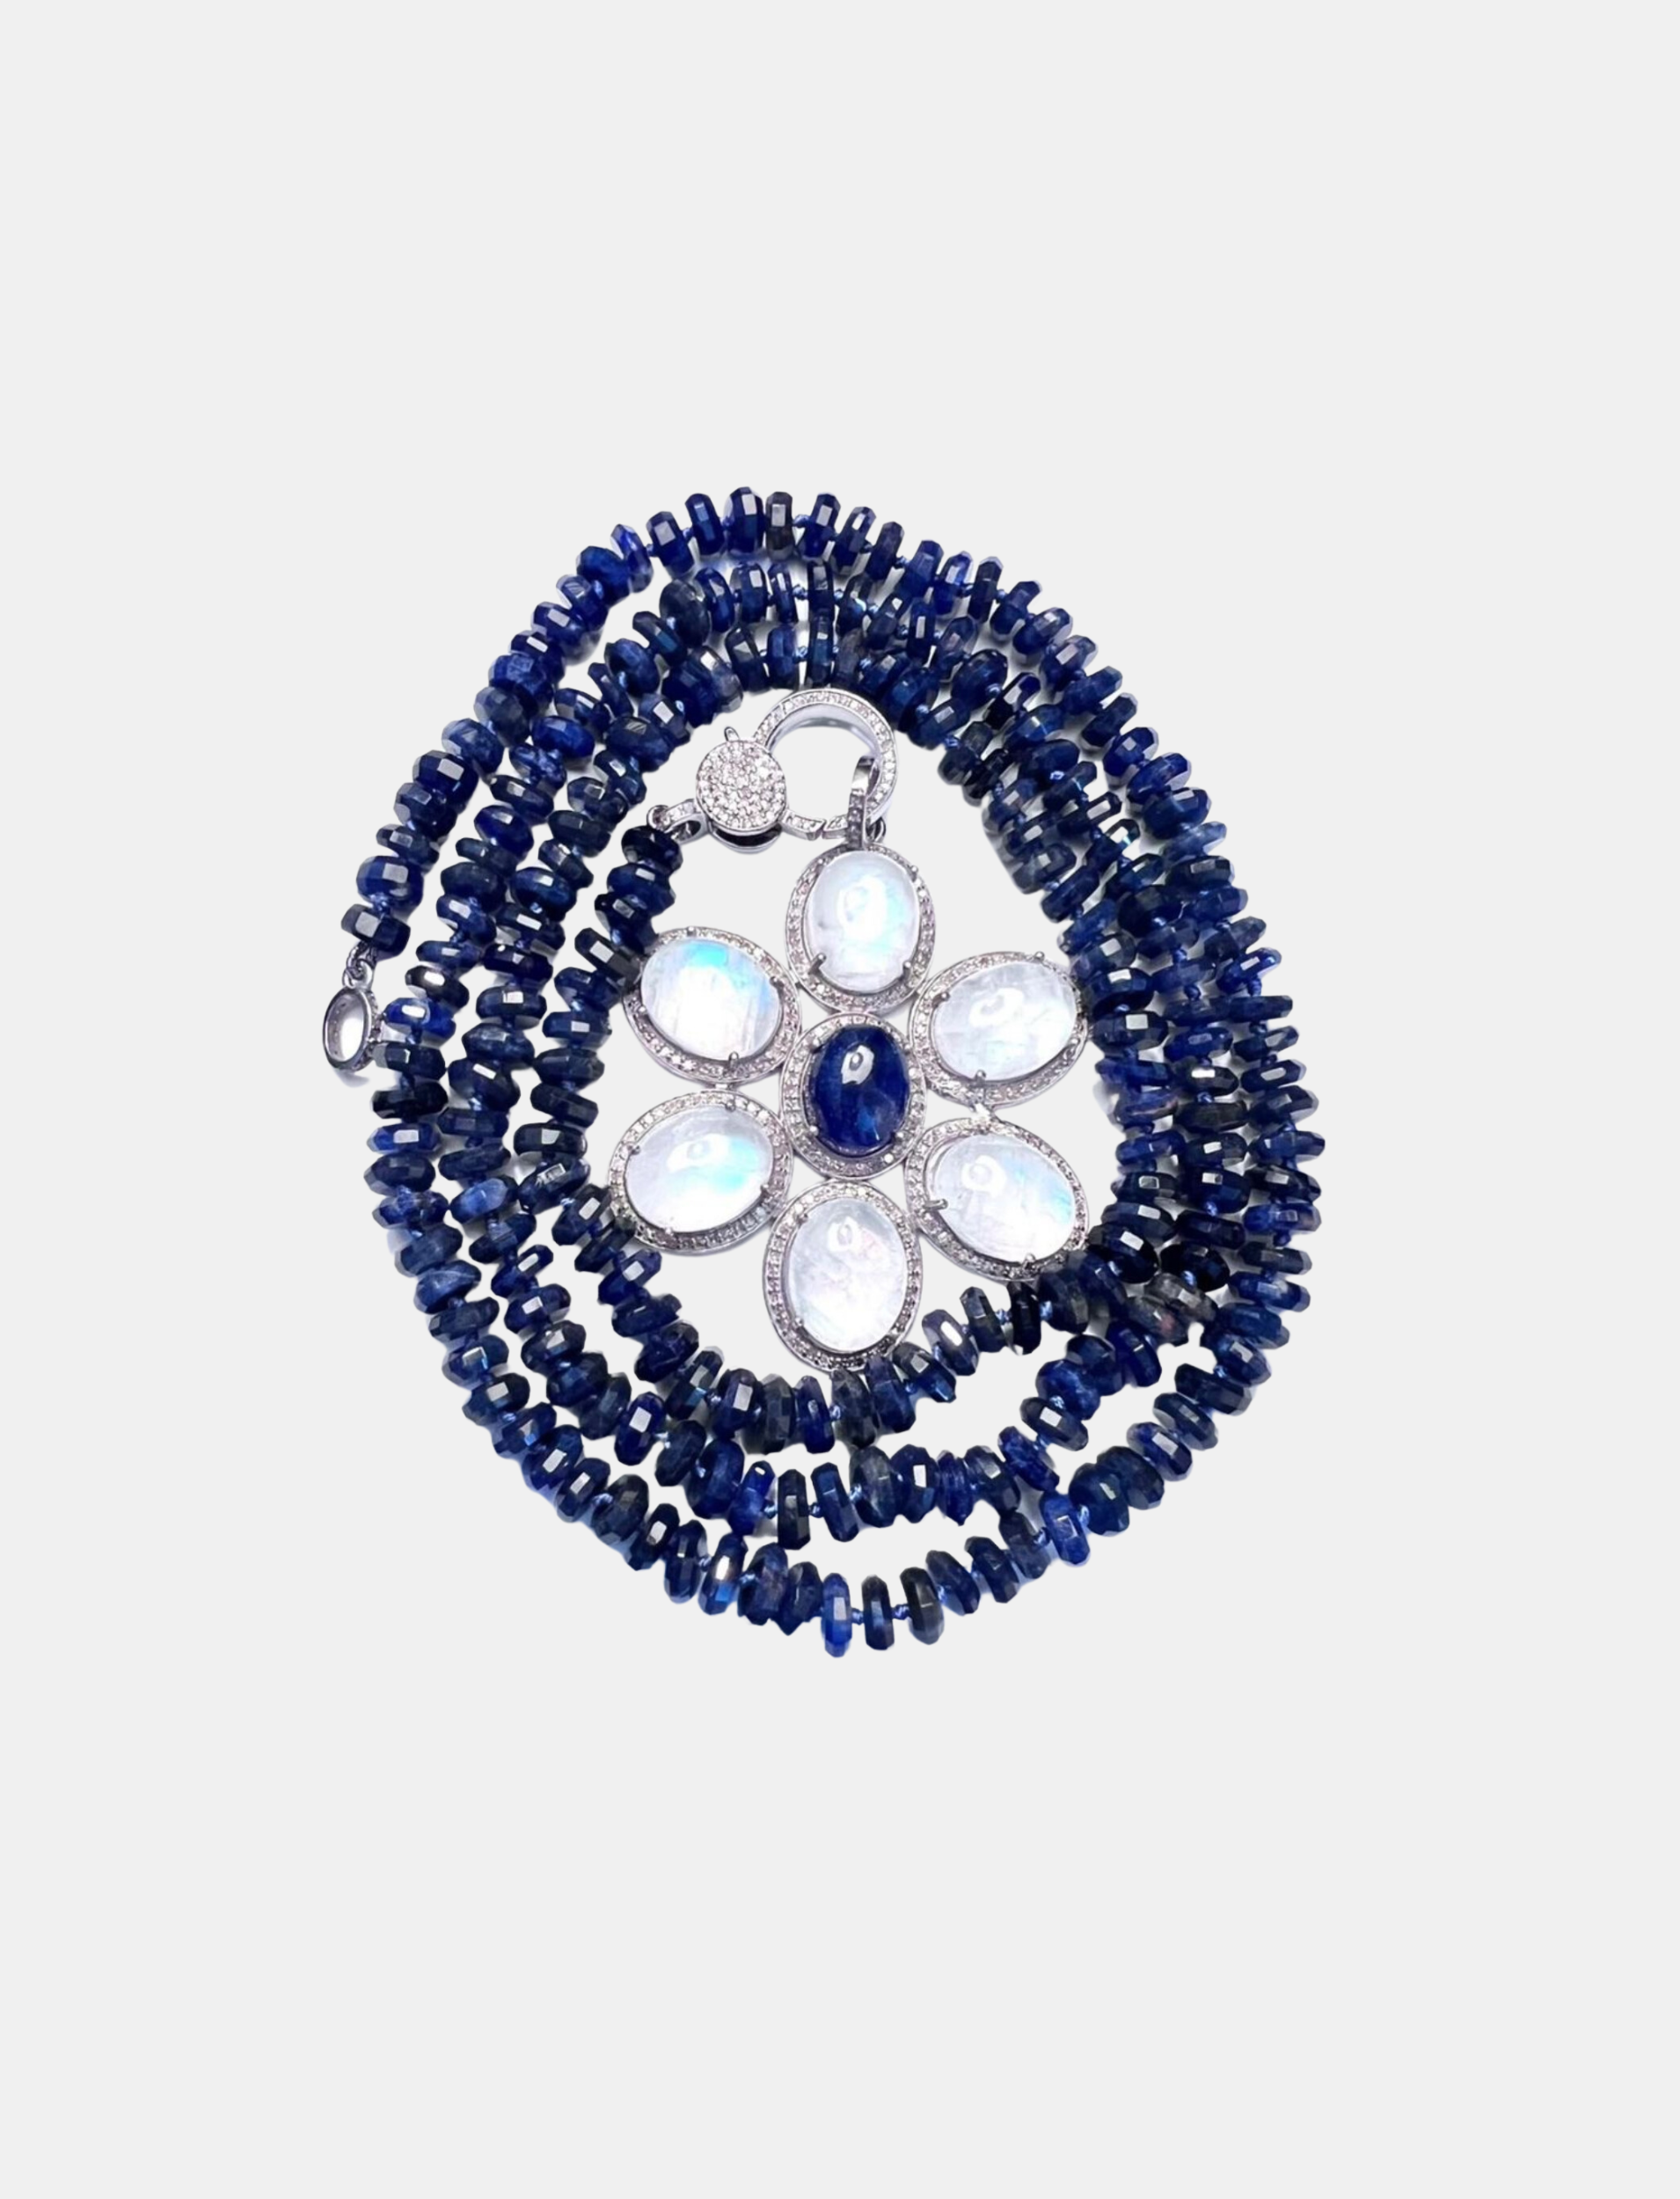 Sodalite Knotted Necklace with Sapphire Moonstone Flower